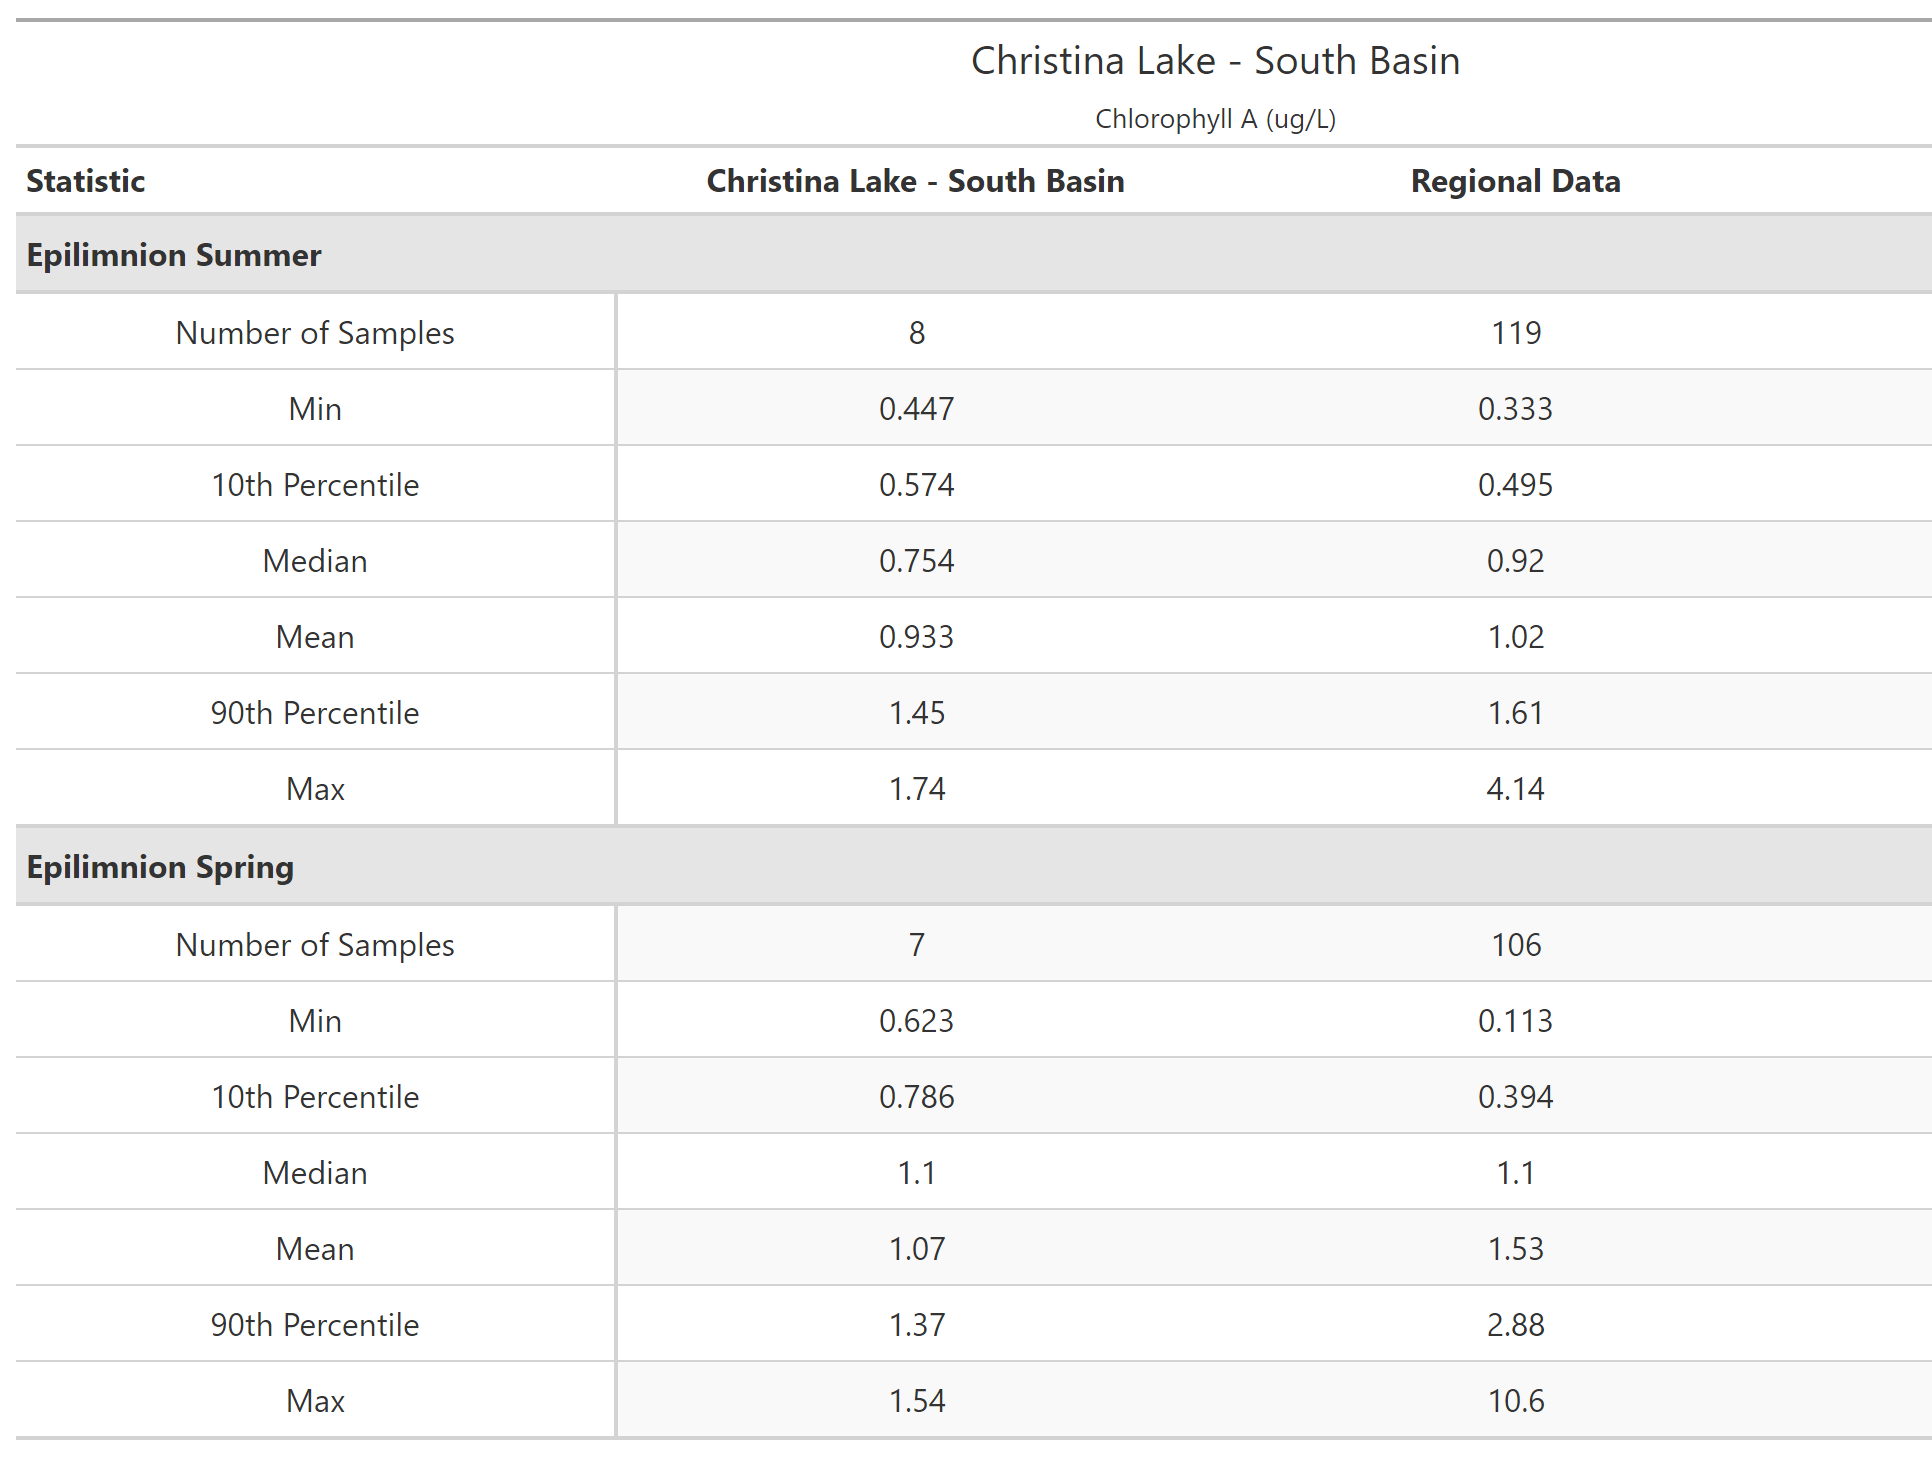 A table of summary statistics for Chlorophyll A with comparison to regional data